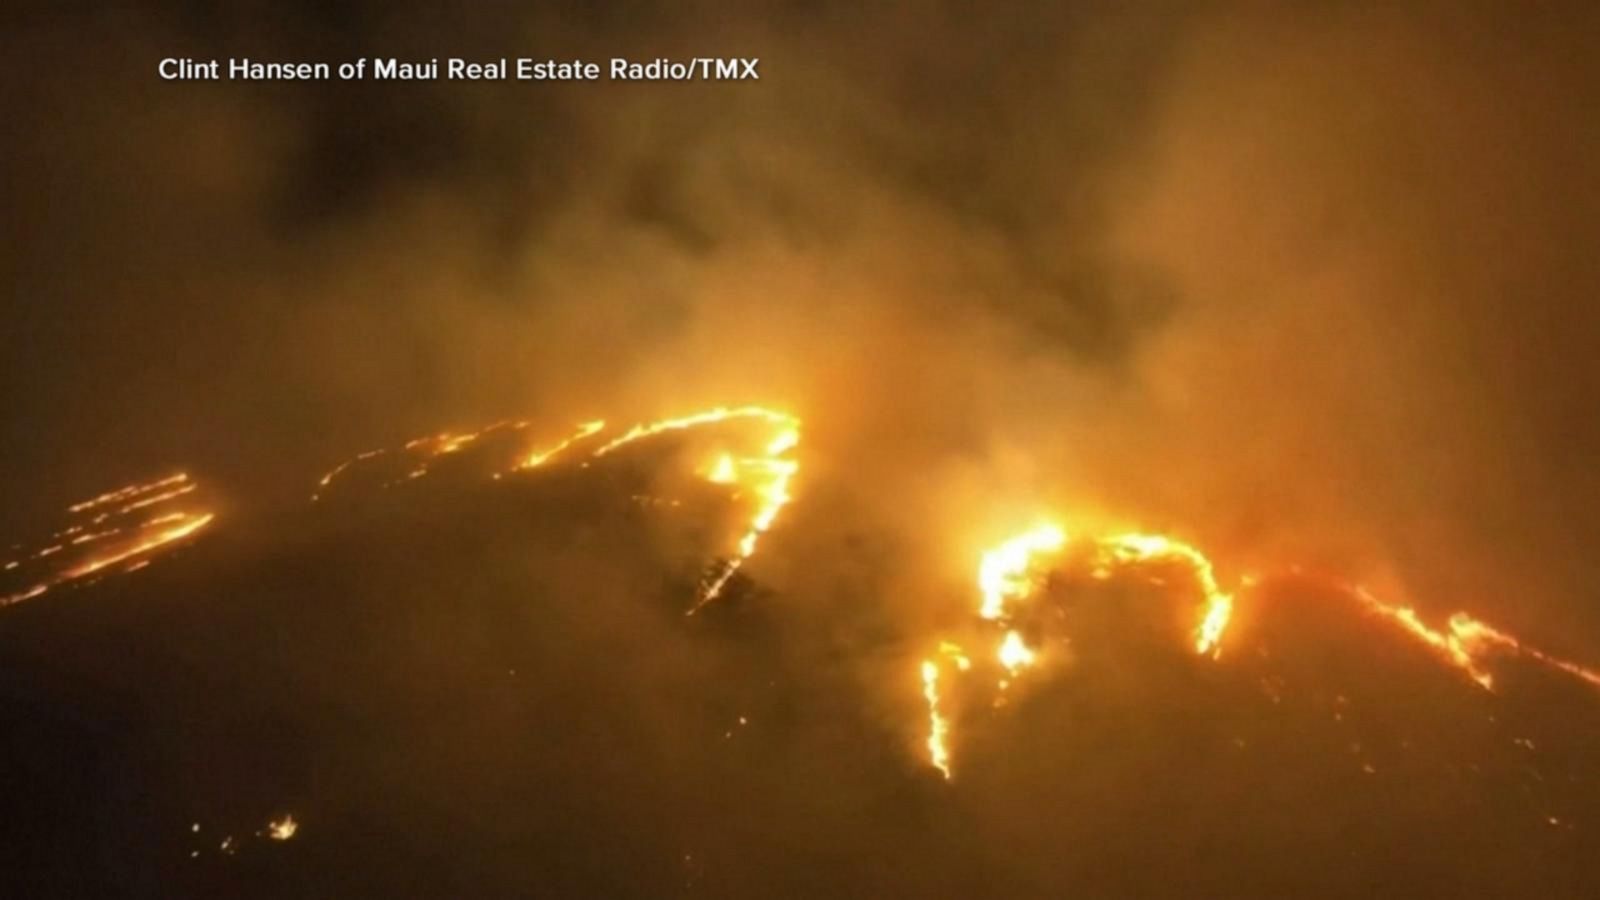 VIDEO: Investigation into cause of Maui wildfire intensifies